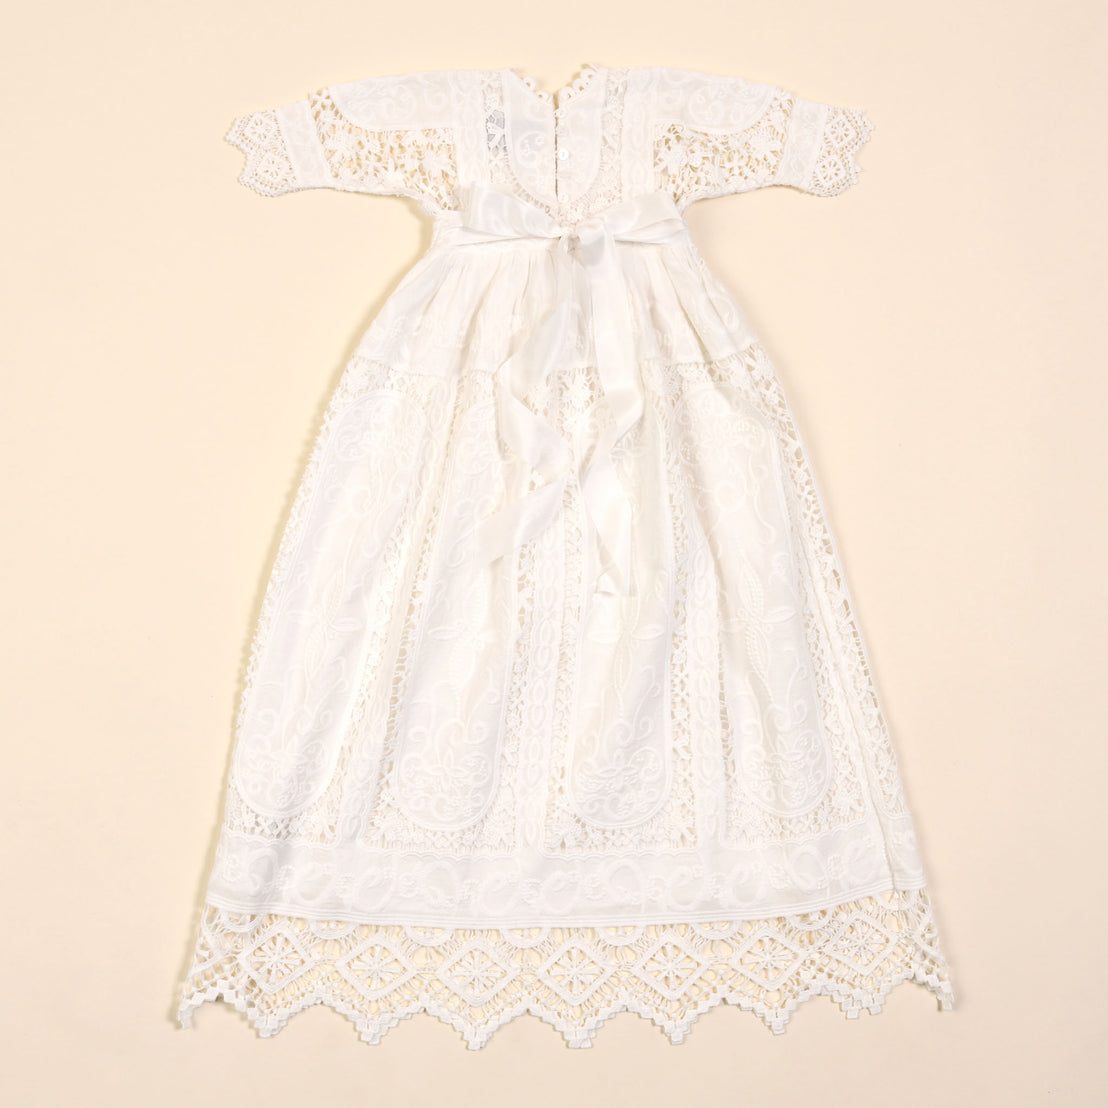 A vintage Adeline Newborn Lace Dress or Gown with short sleeves and intricate patterns displayed against a cream background.